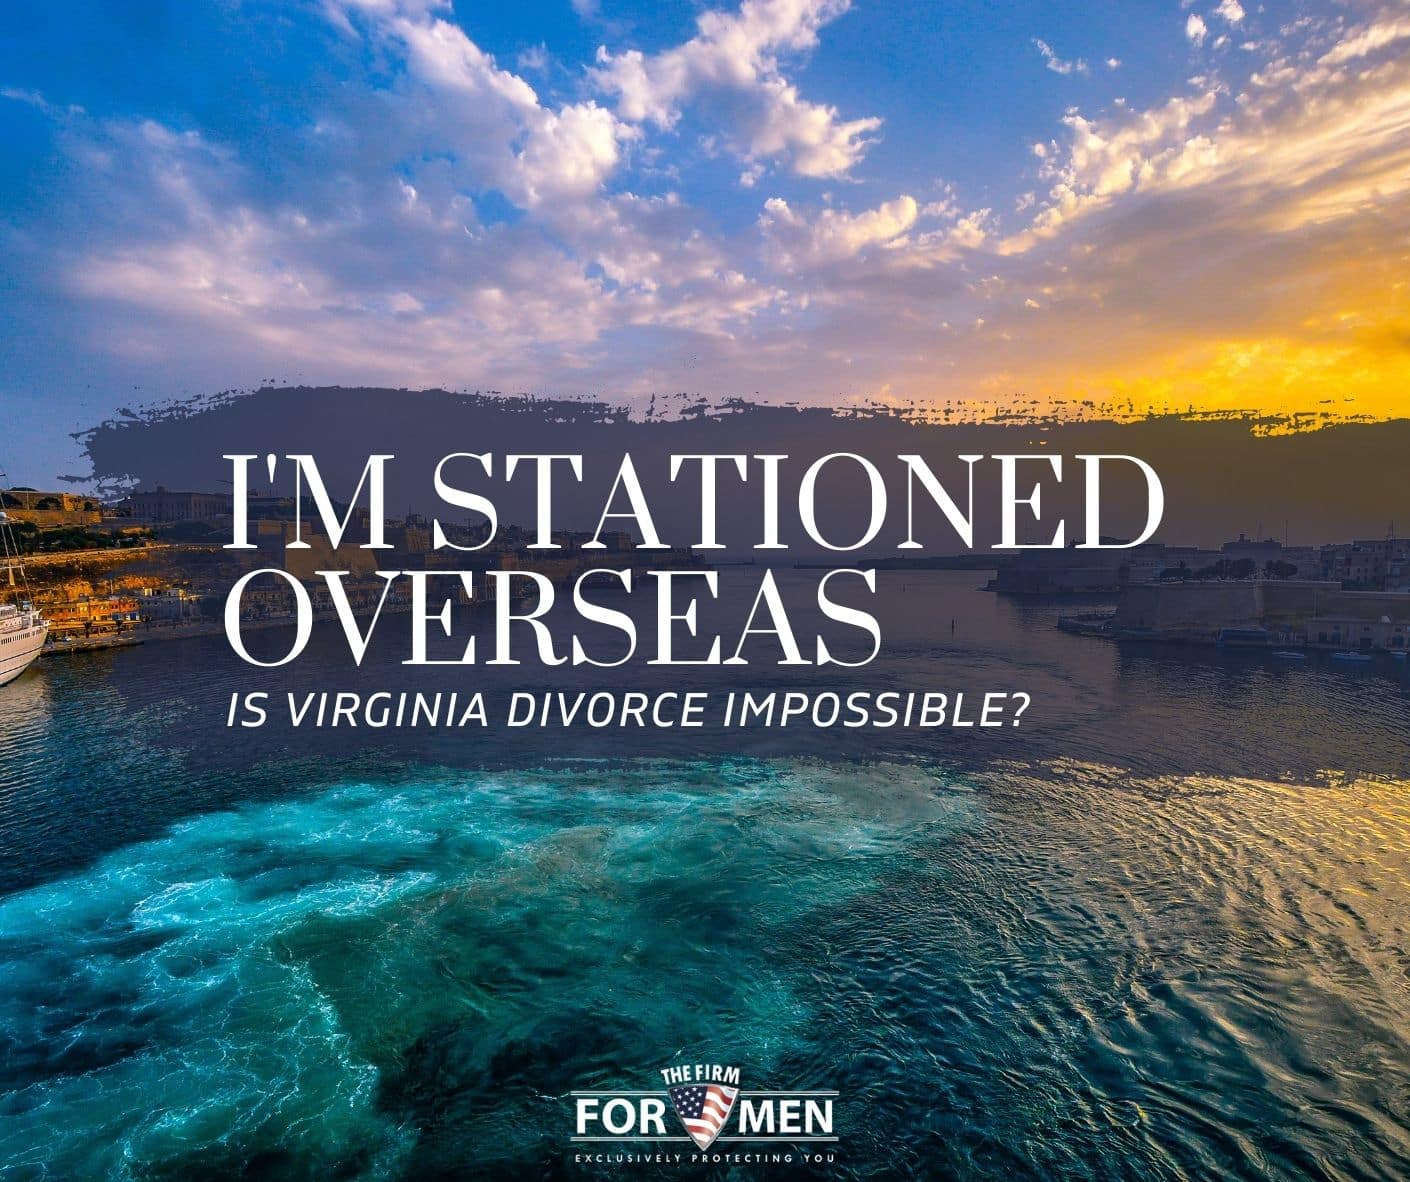 I'm Stationed Overseas ... Is Virginia Divorce Impossible